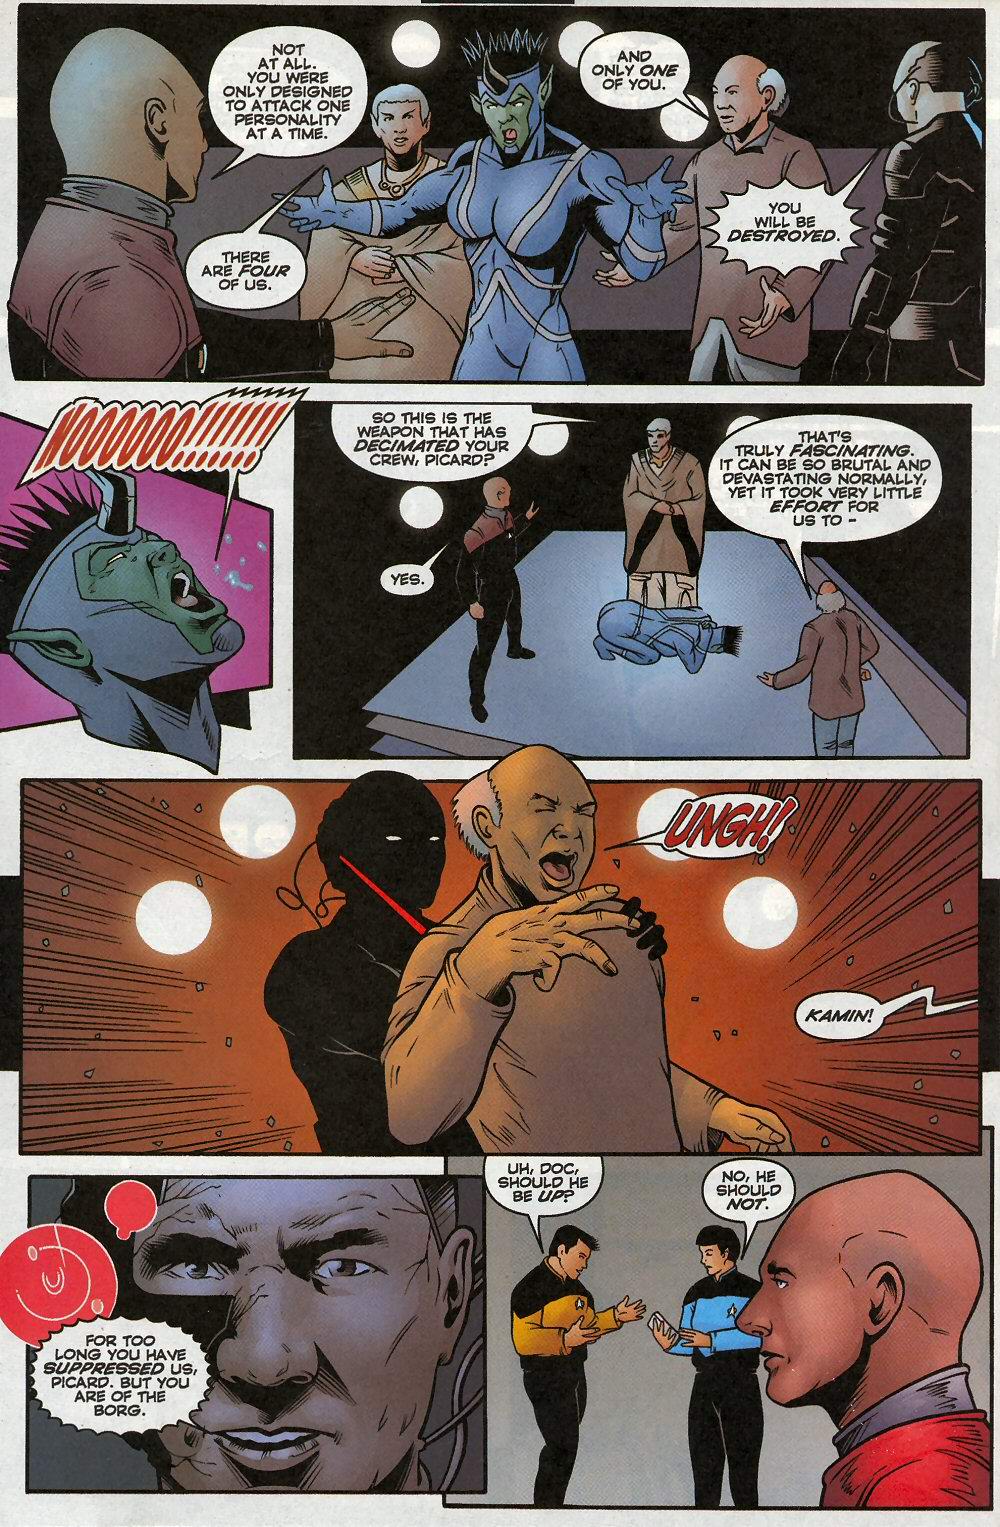 Star Trek: The Next Generation - Perchance to Dream issue 4 - Page 12